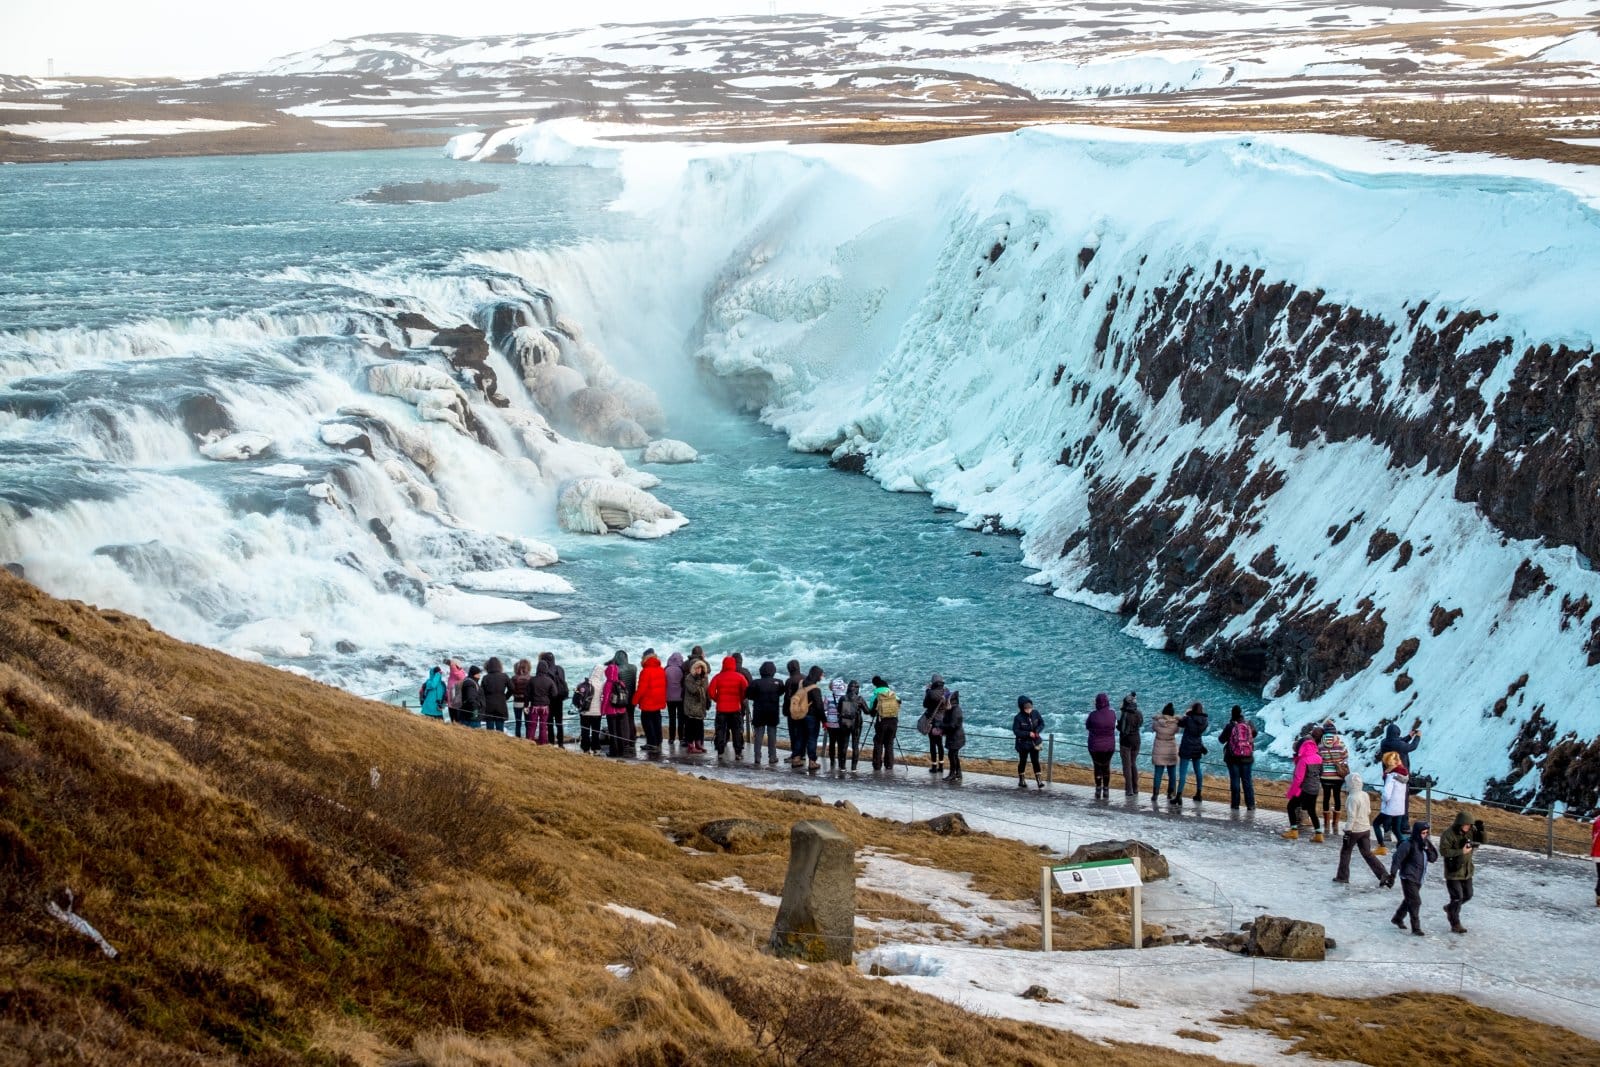 <p class="wp-caption-text">Image Credit: Shutterstock / lenggirl</p>  <p>The delicate landscapes of Iceland struggle under the environmental impact caused by excessive tourism, with Americans often seen as the worst offenders for going off-path and disrupting fragile ecosystems.</p>